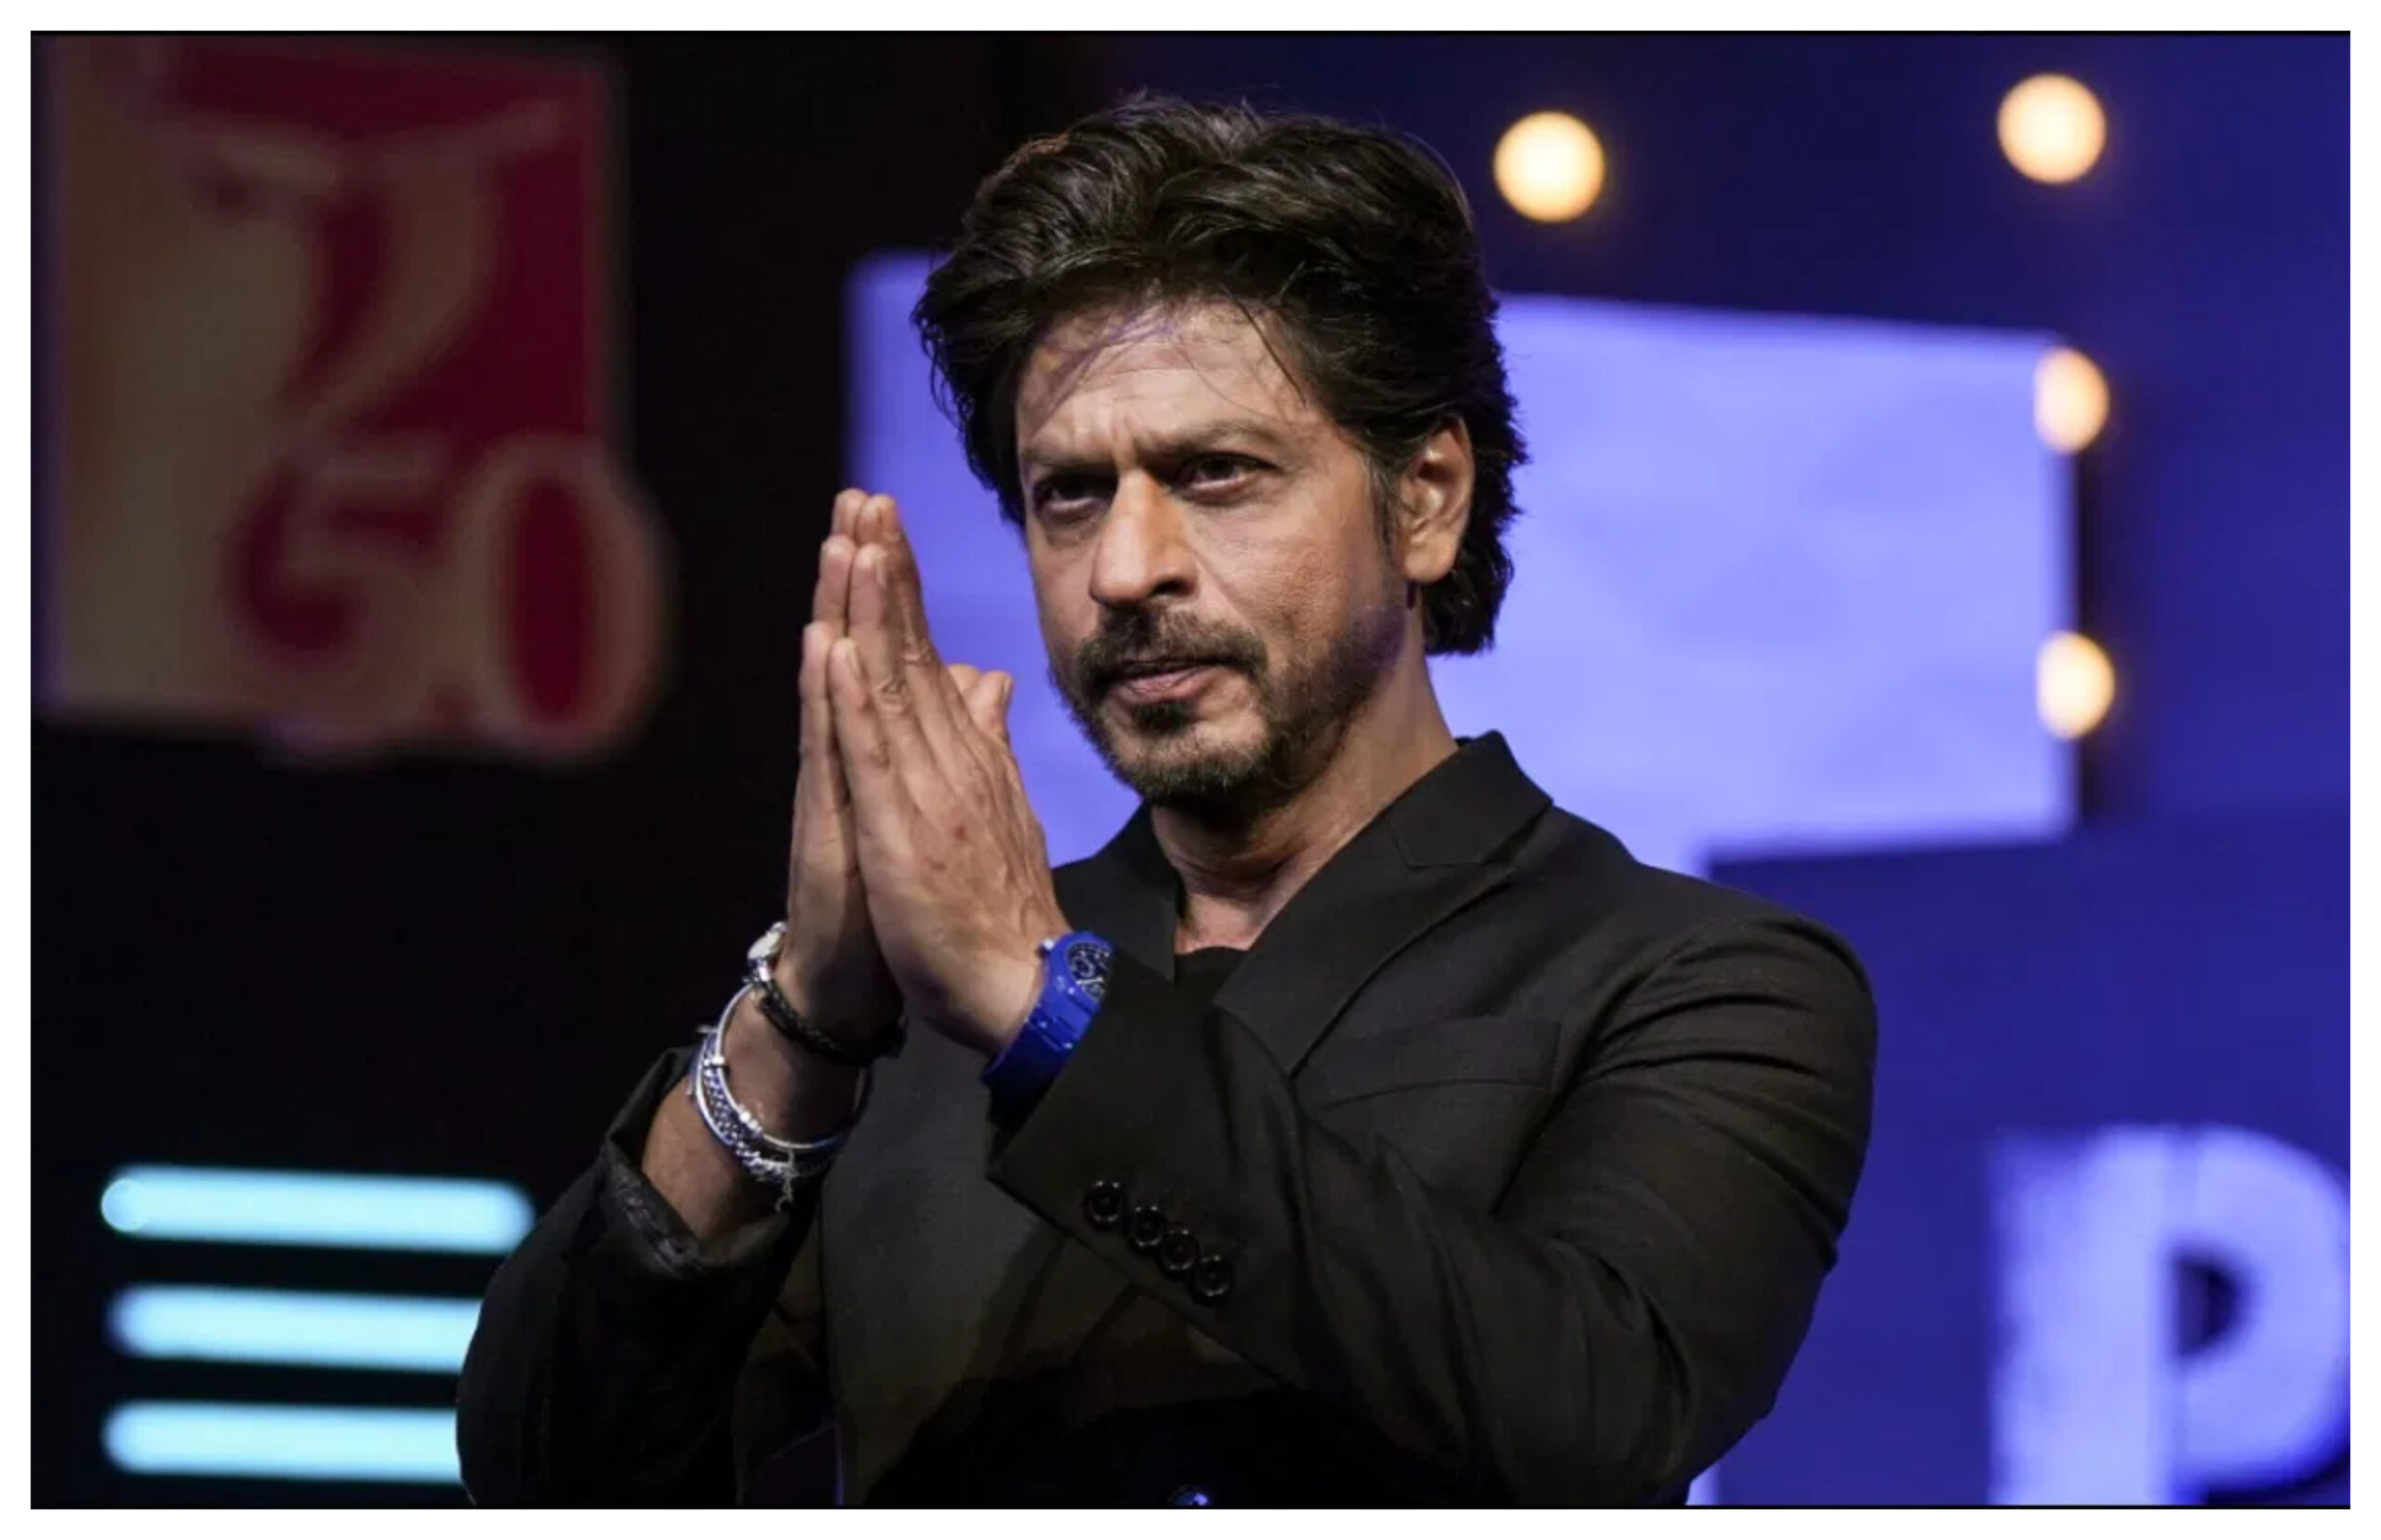 Shahrukh Khan: Actor Shahrukh Khan's appeal to voters - do your duty, definitely vote. shahrukh khan, shahrukh khan movies, election in maharashtra, 2024 lok shabha election, shahrukh khan social media, shahrukh khan jawan film, jawan film box office collection, #loksabhaelection2024, #Elections2024, #election, #vote, #voting, #shahrukhkhan, #salmankhan, #maharashtra, #mumbai-youtube-facebook-twitter-amazon-google-totaltv live, total news in hindi